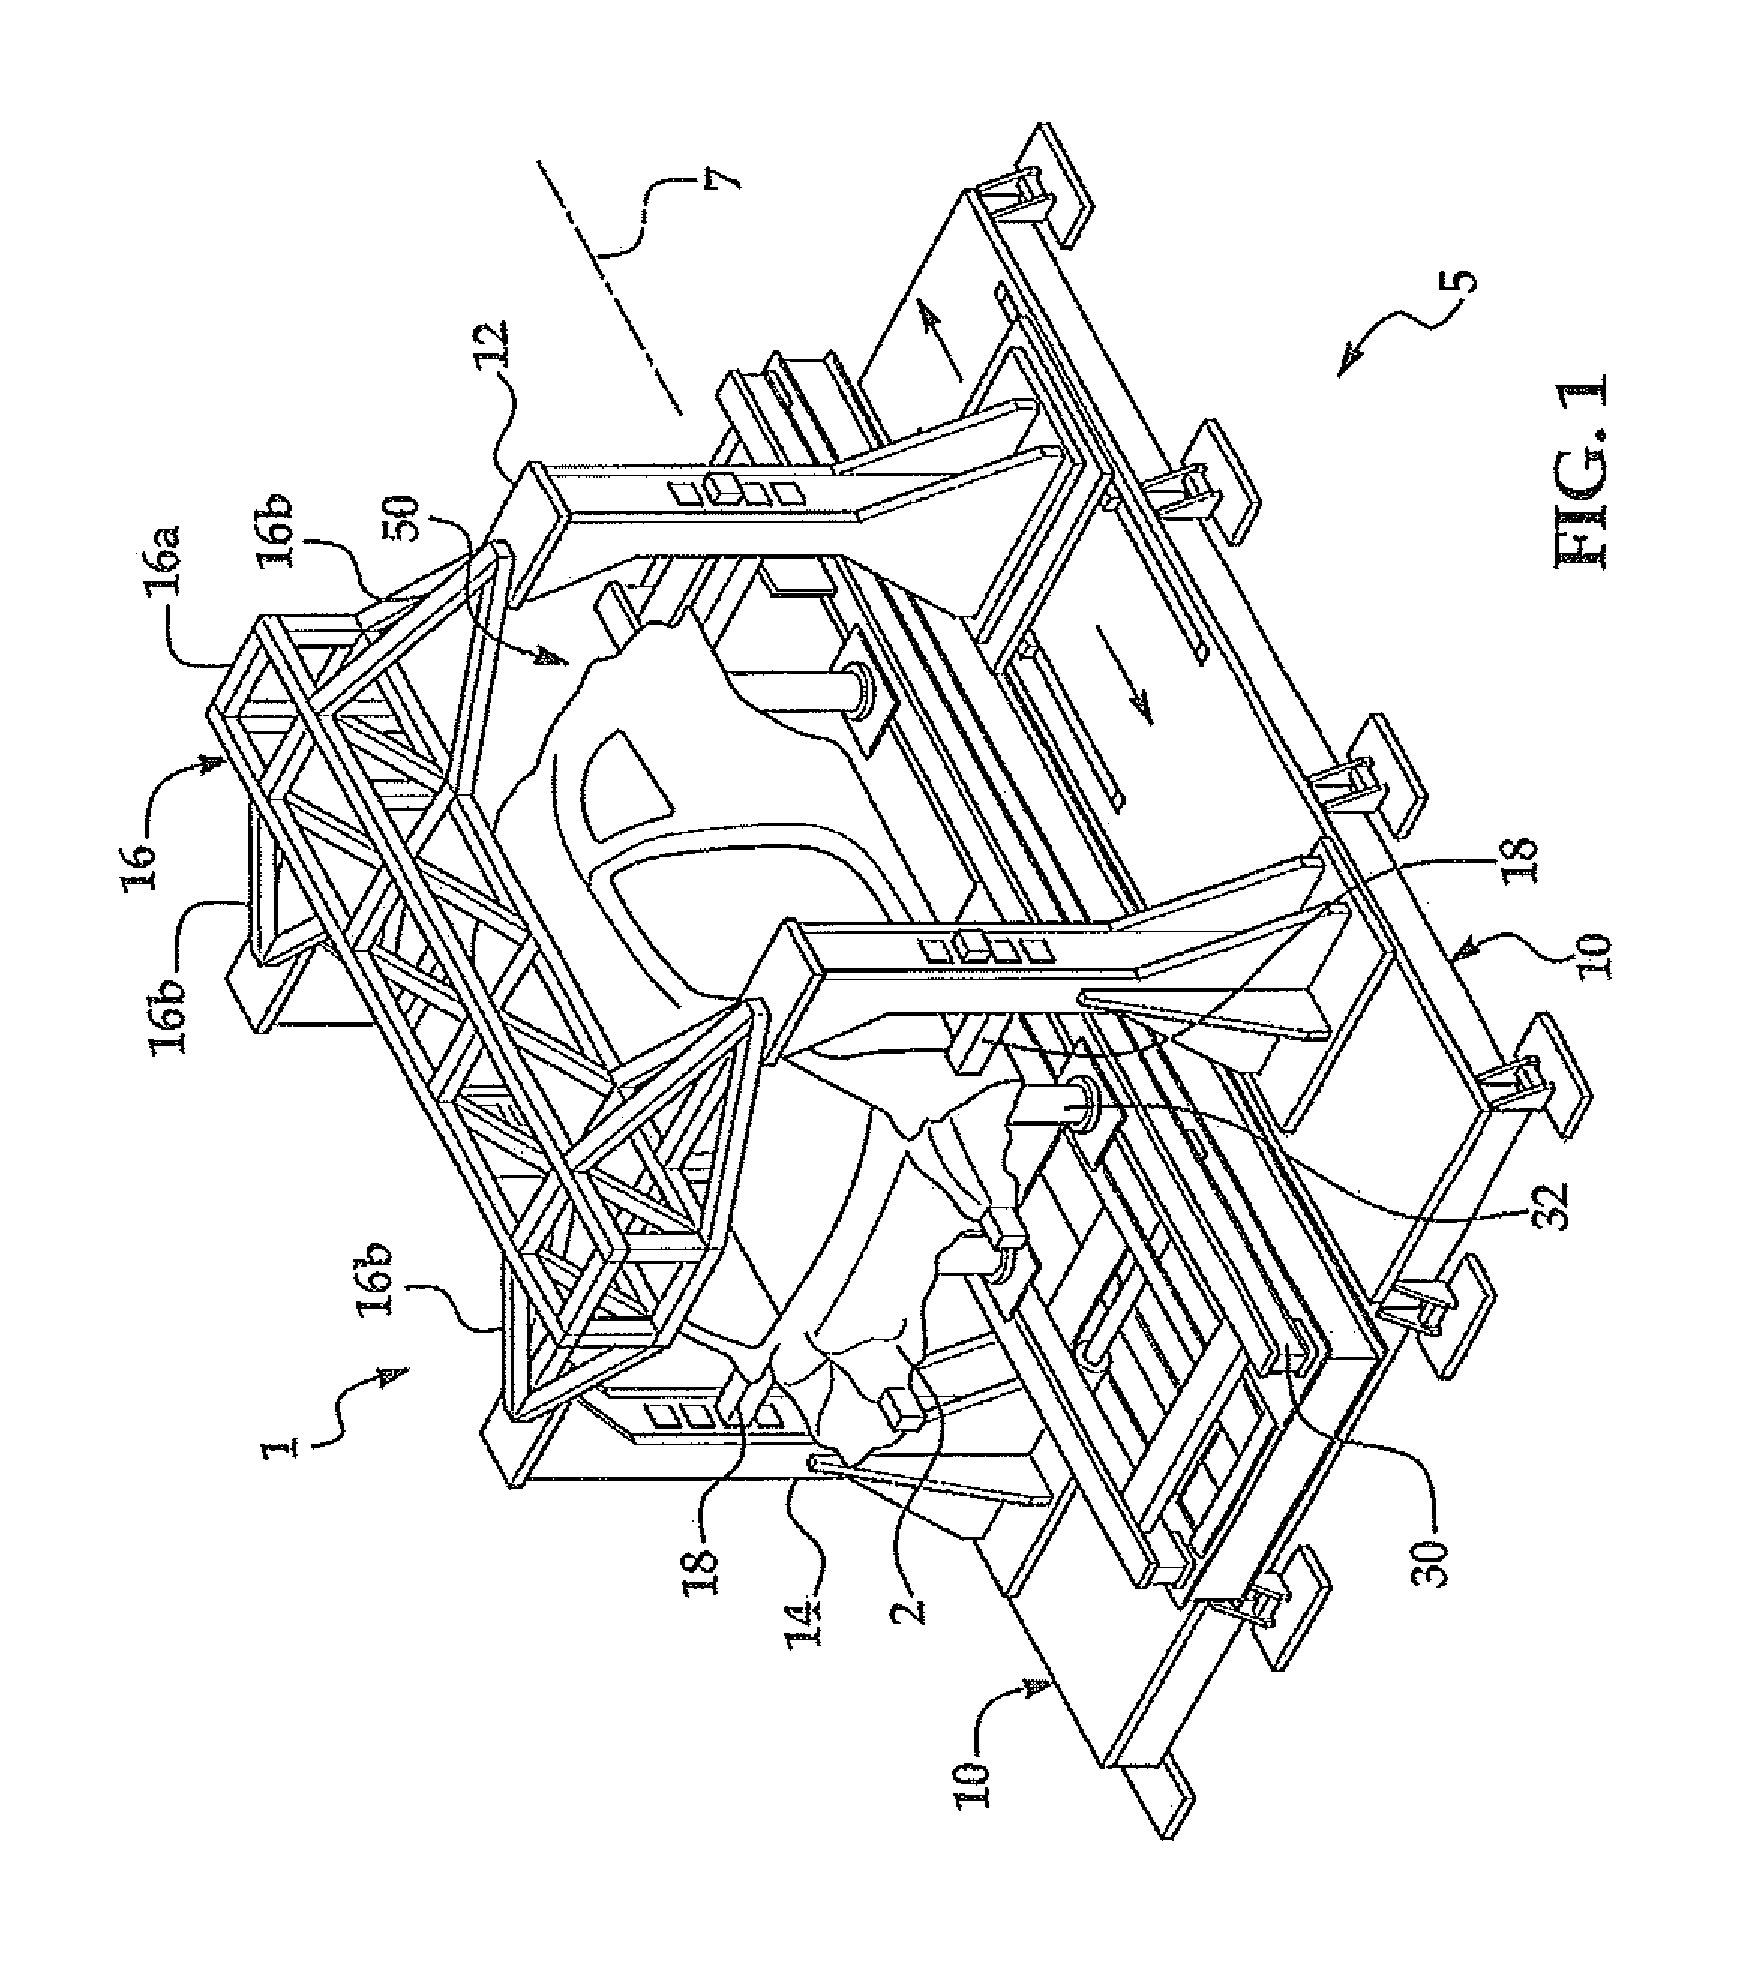 Variable vehicle body fixed framer and method